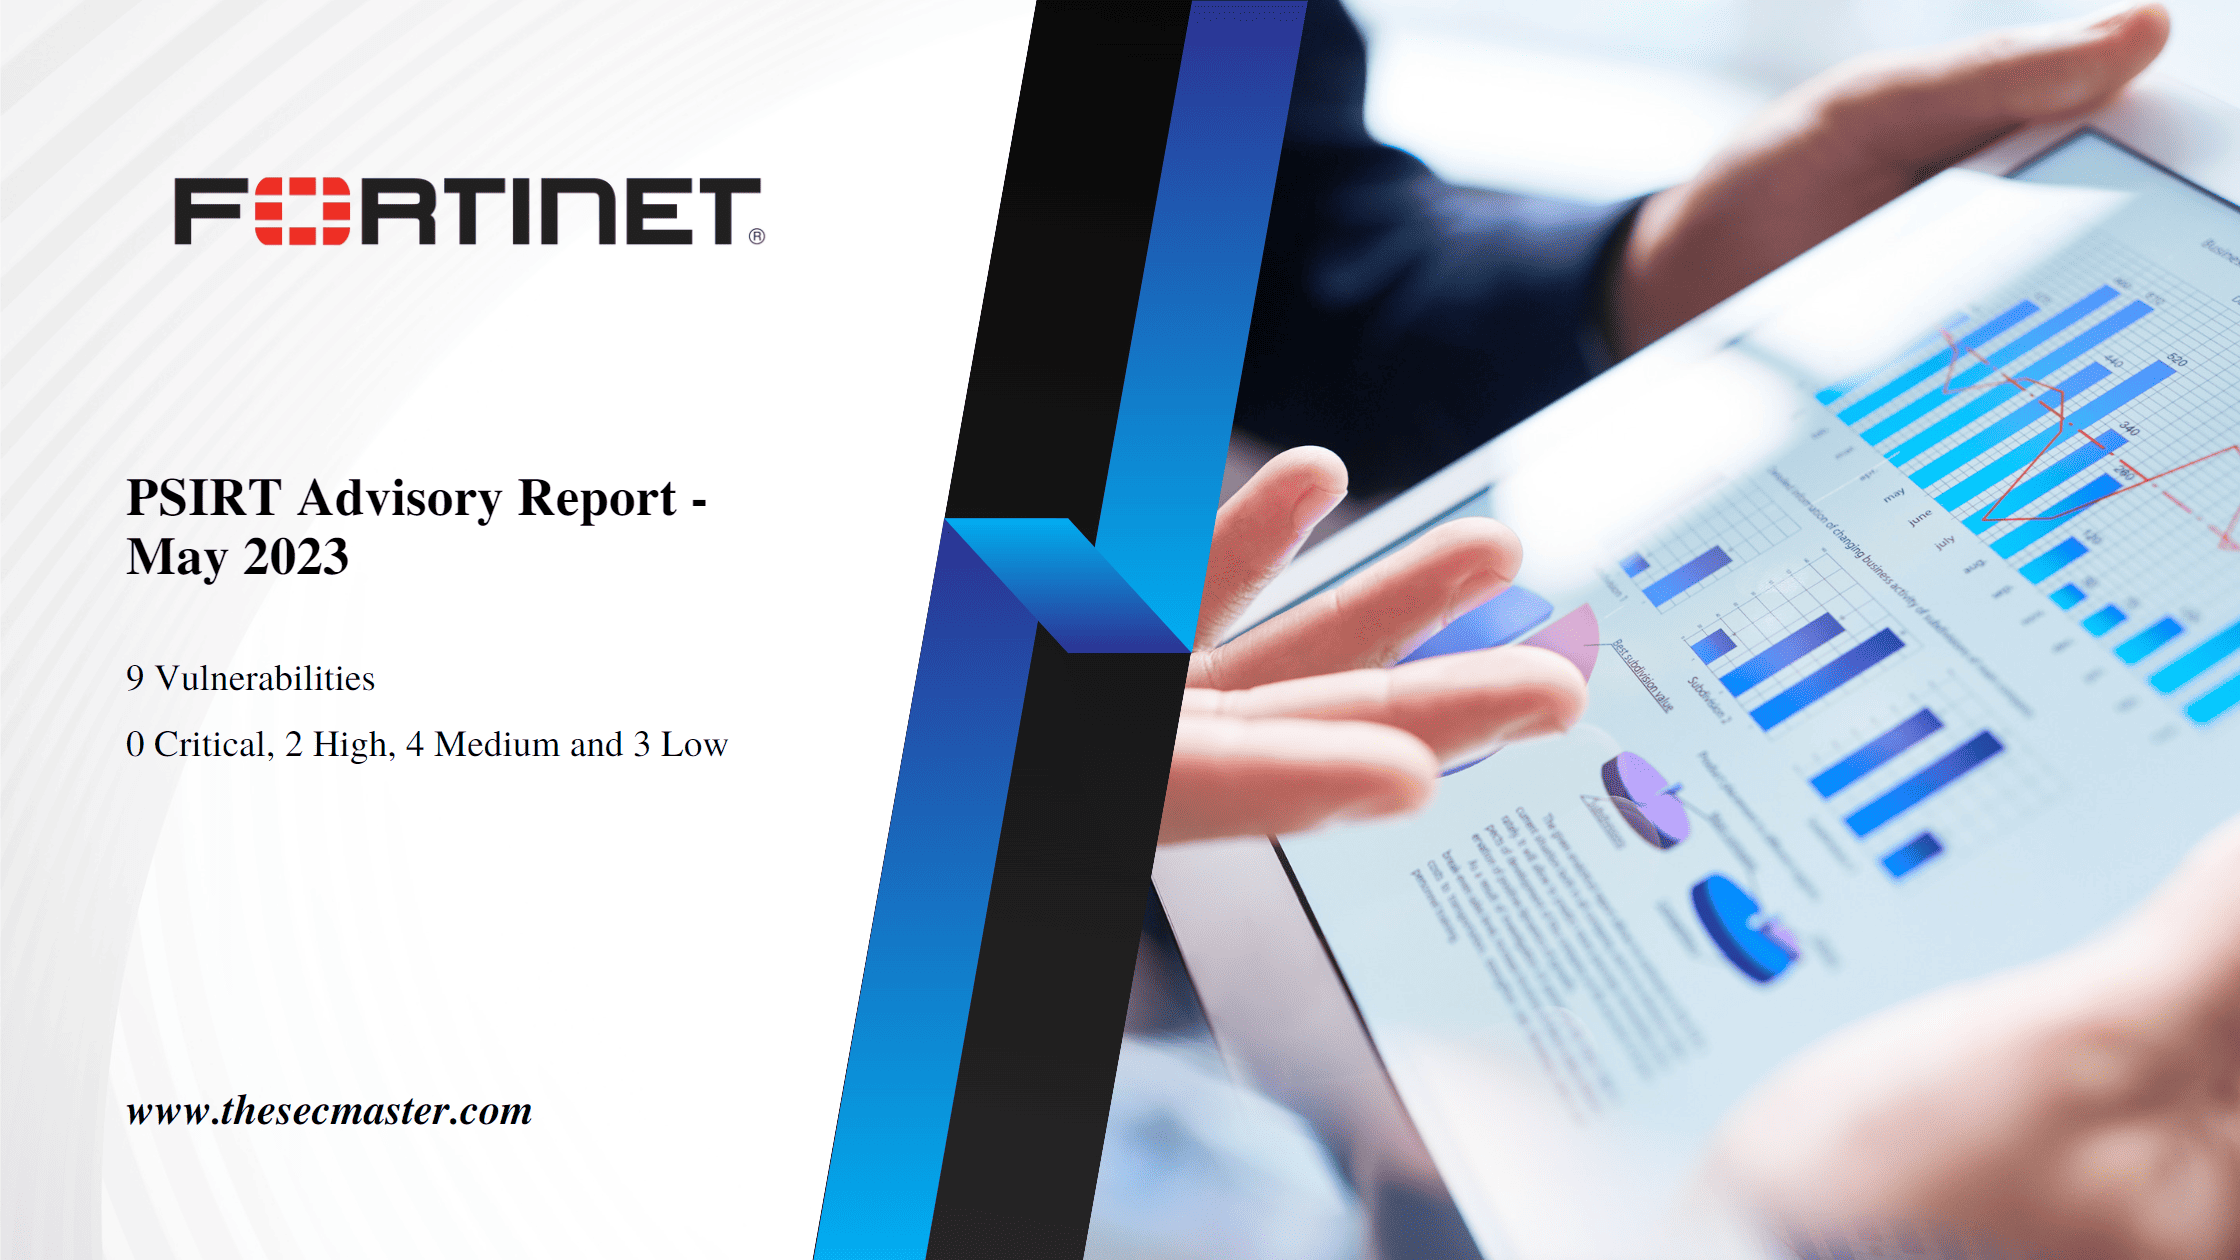 Breaking Down The Latest May 2023 Monthly Psirt Advisory Report From Fortinet